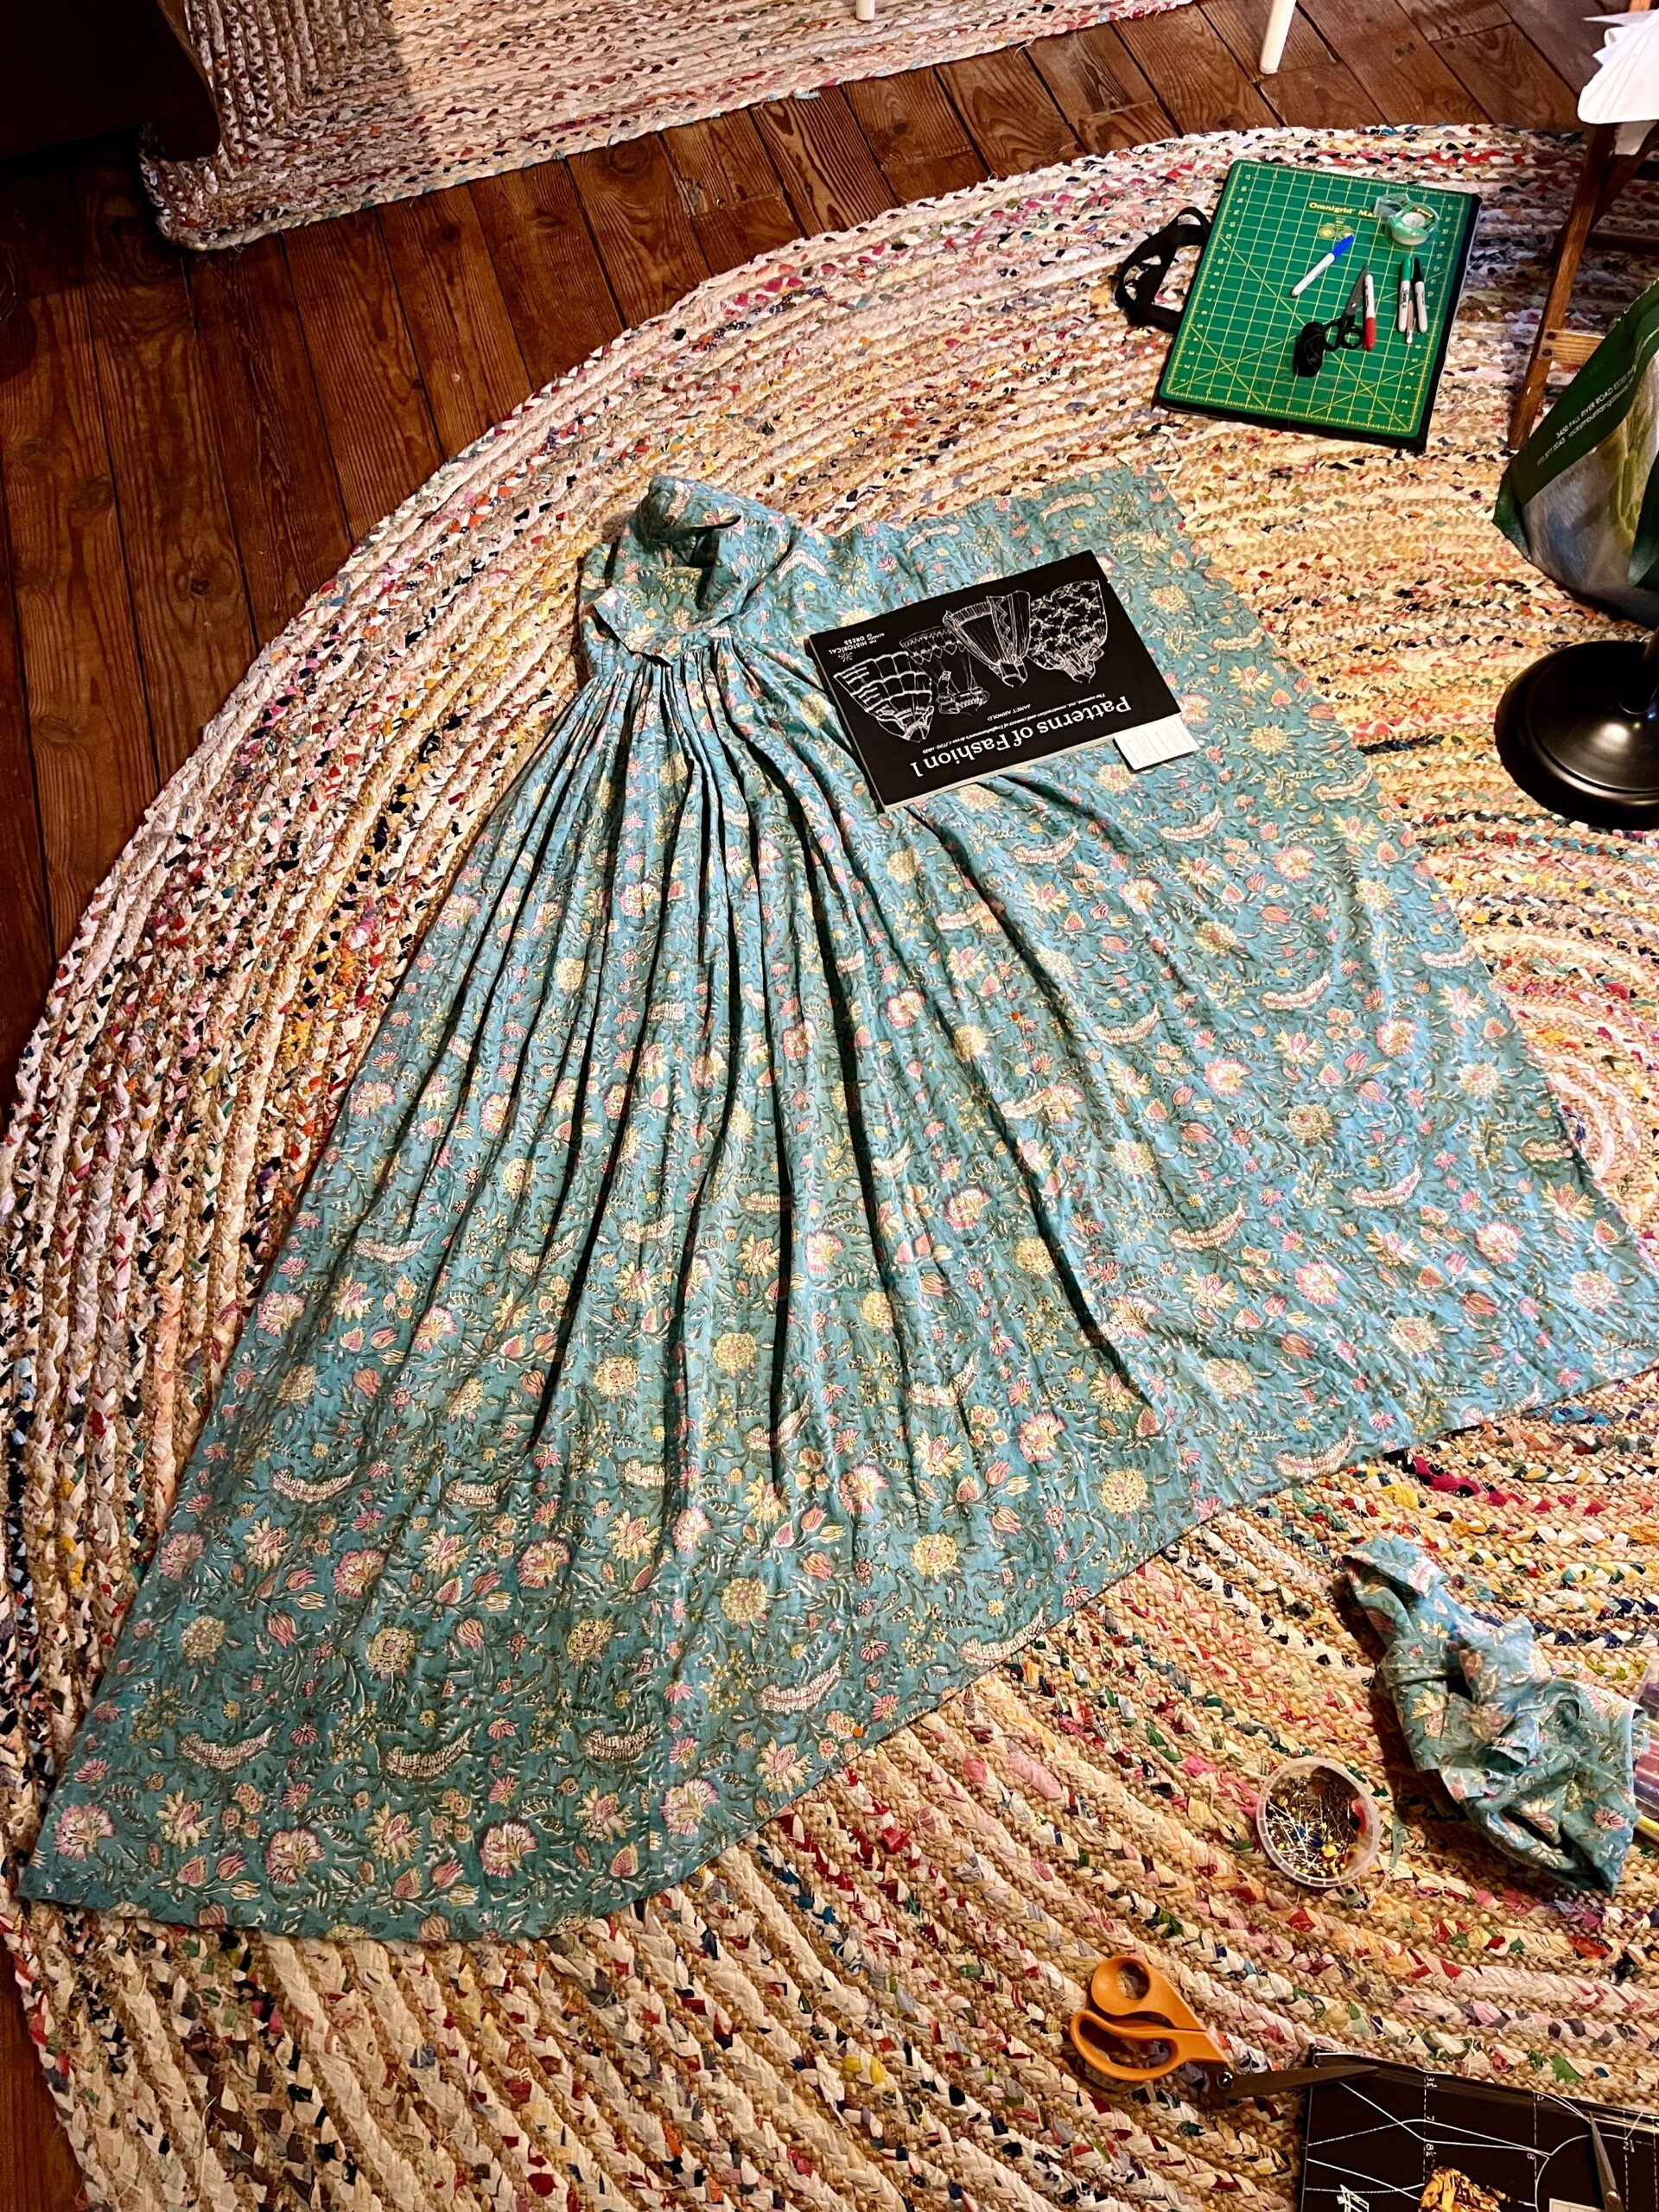 A 1790s round gown lies spread out on the floor